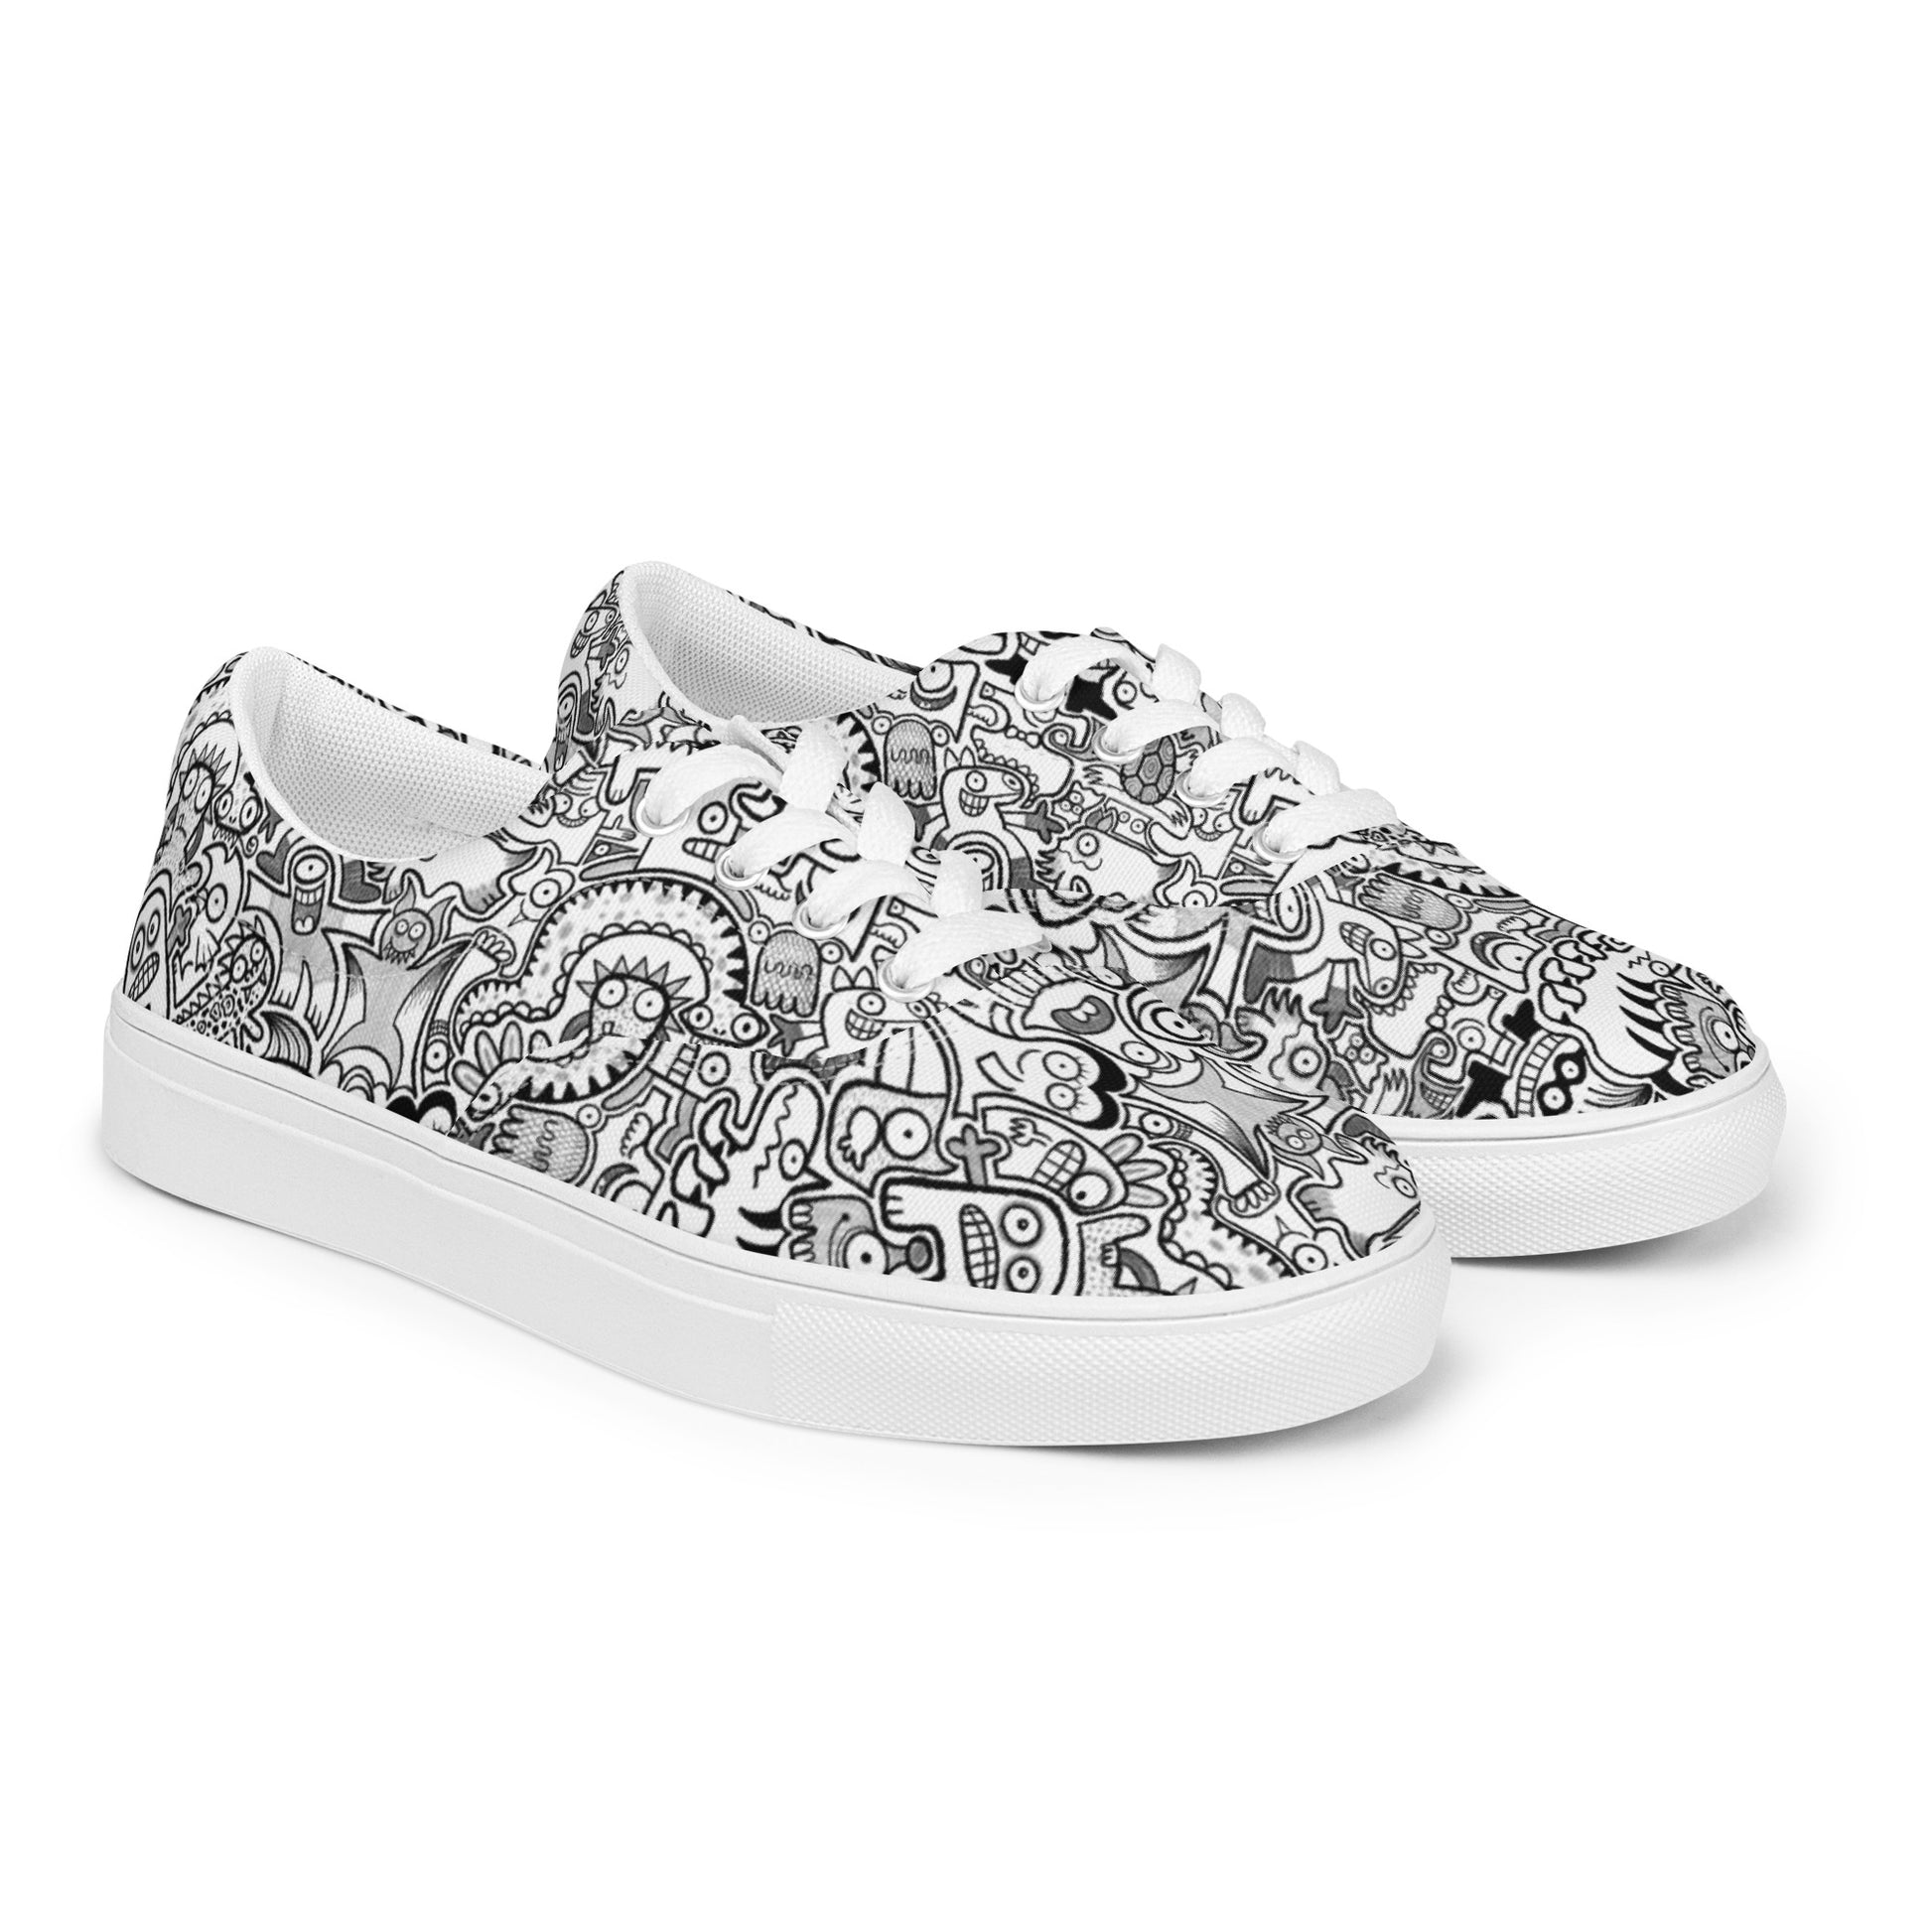 Fill your world with cool doodles Women’s lace-up canvas shoes. Overview